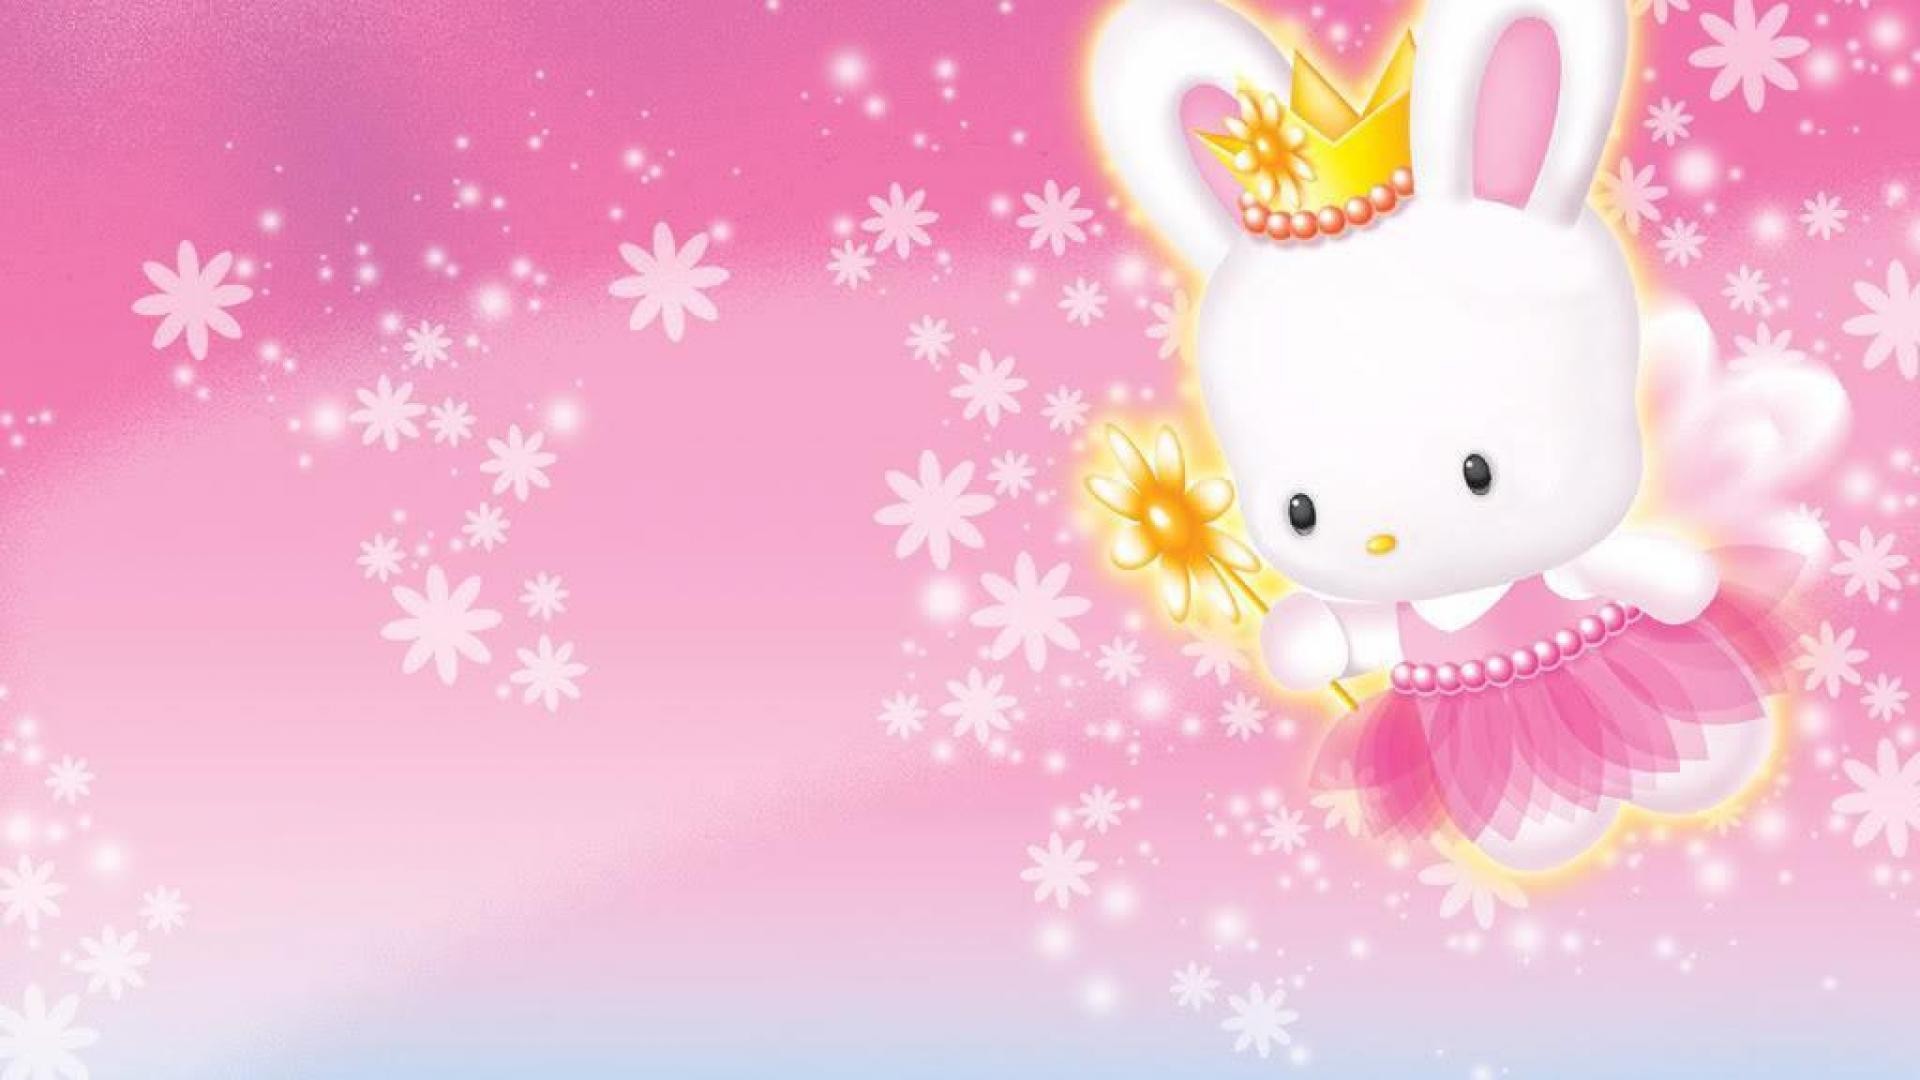 Sanrio Hello Kitty HD Wallpaper with image resolution 1920x1080 pixel. You can make this wallpaper for your Desktop Computer Backgrounds, Mac Wallpapers, Android Lock screen or iPhone Screensavers